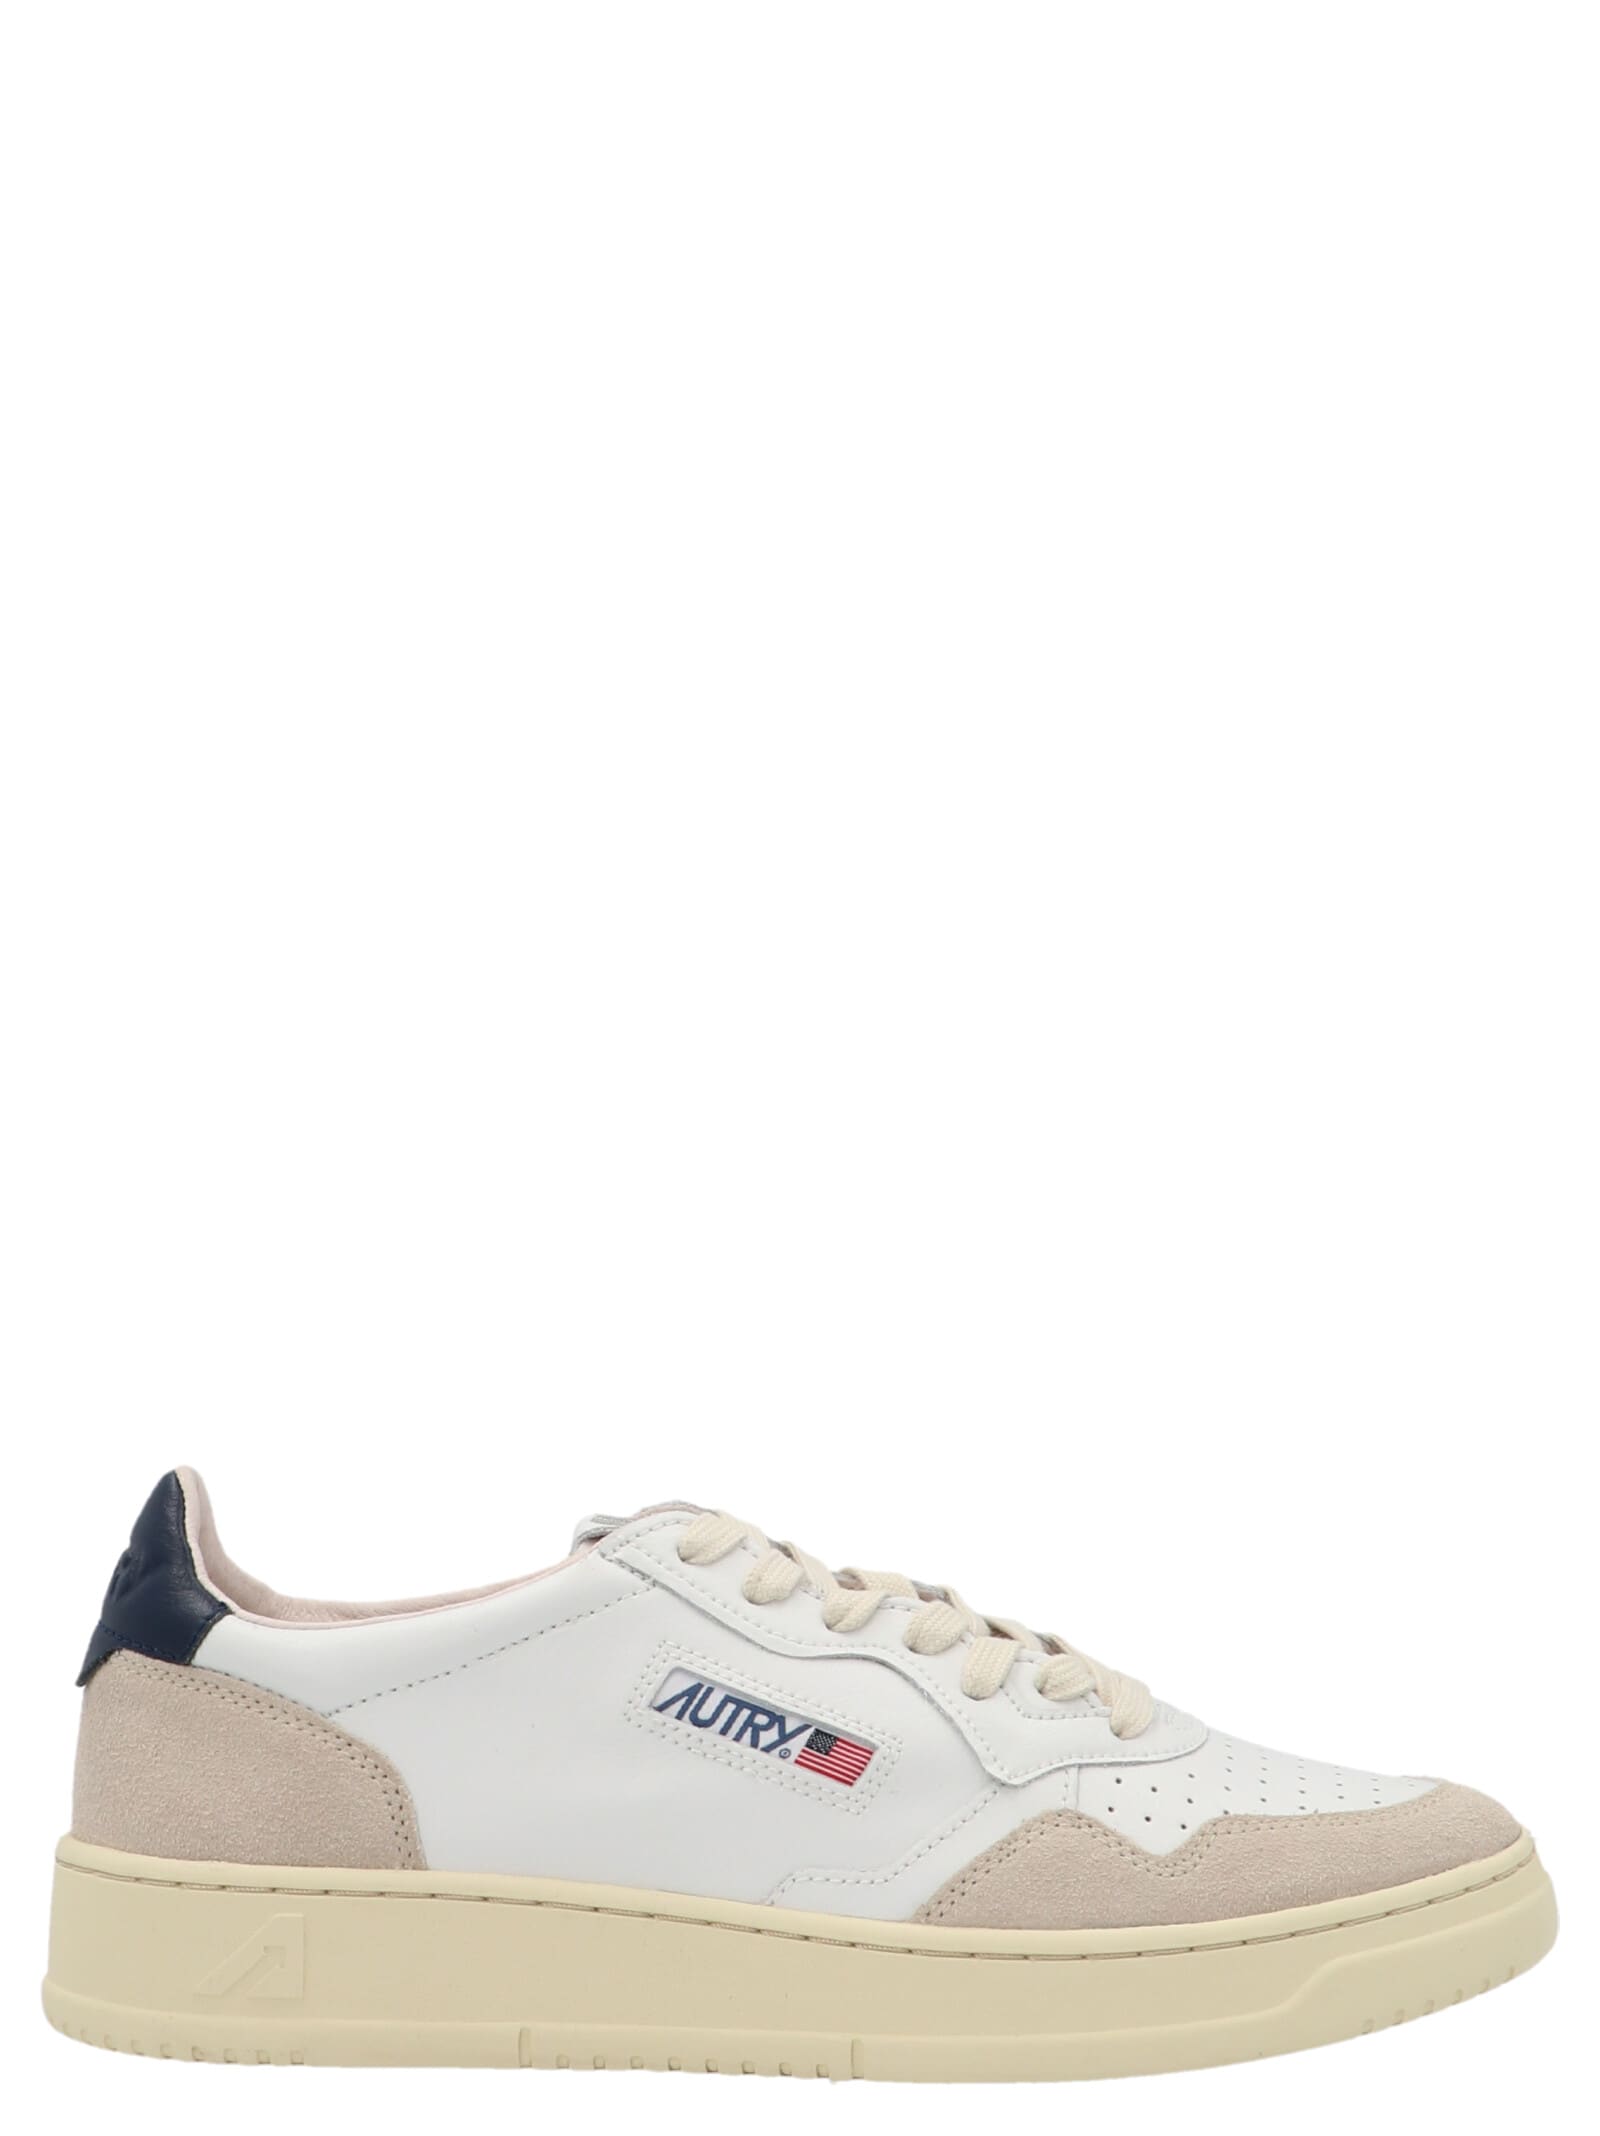 Autry 01 Sneakers In White